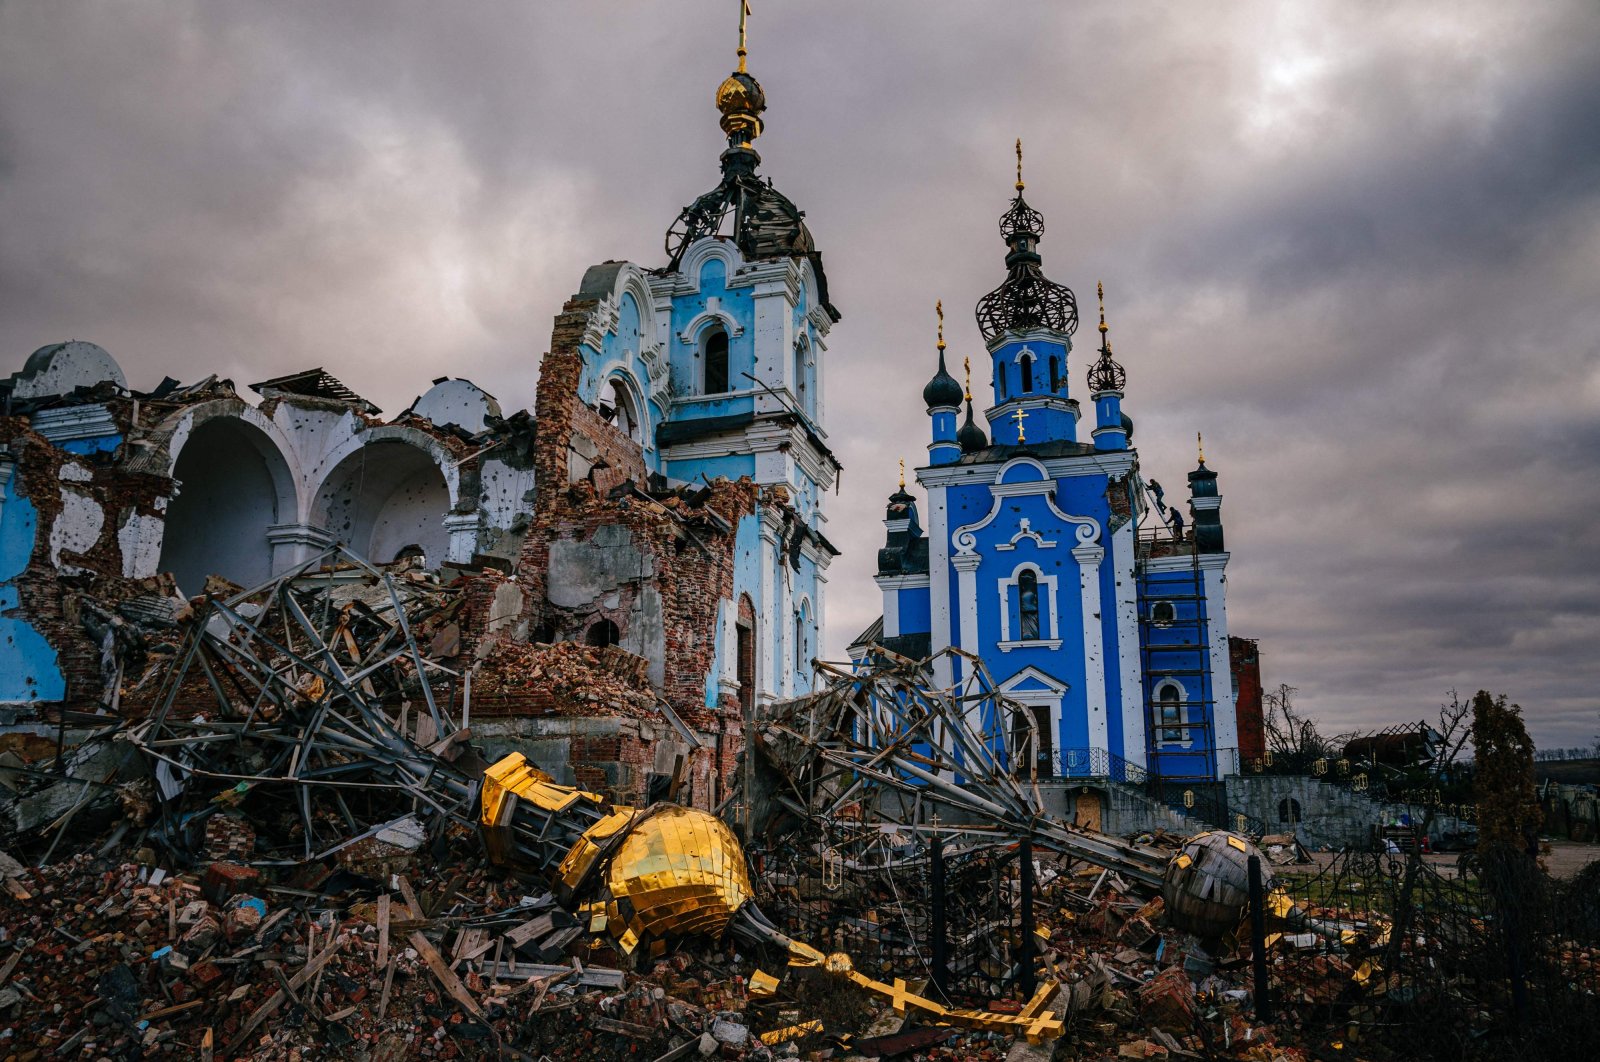 Construction workers climb onto the roof of a destroyed church in the village of Bohorodychne, Donetsk region, Ukraine, Jan. 4, 2023. (AFP Photo)